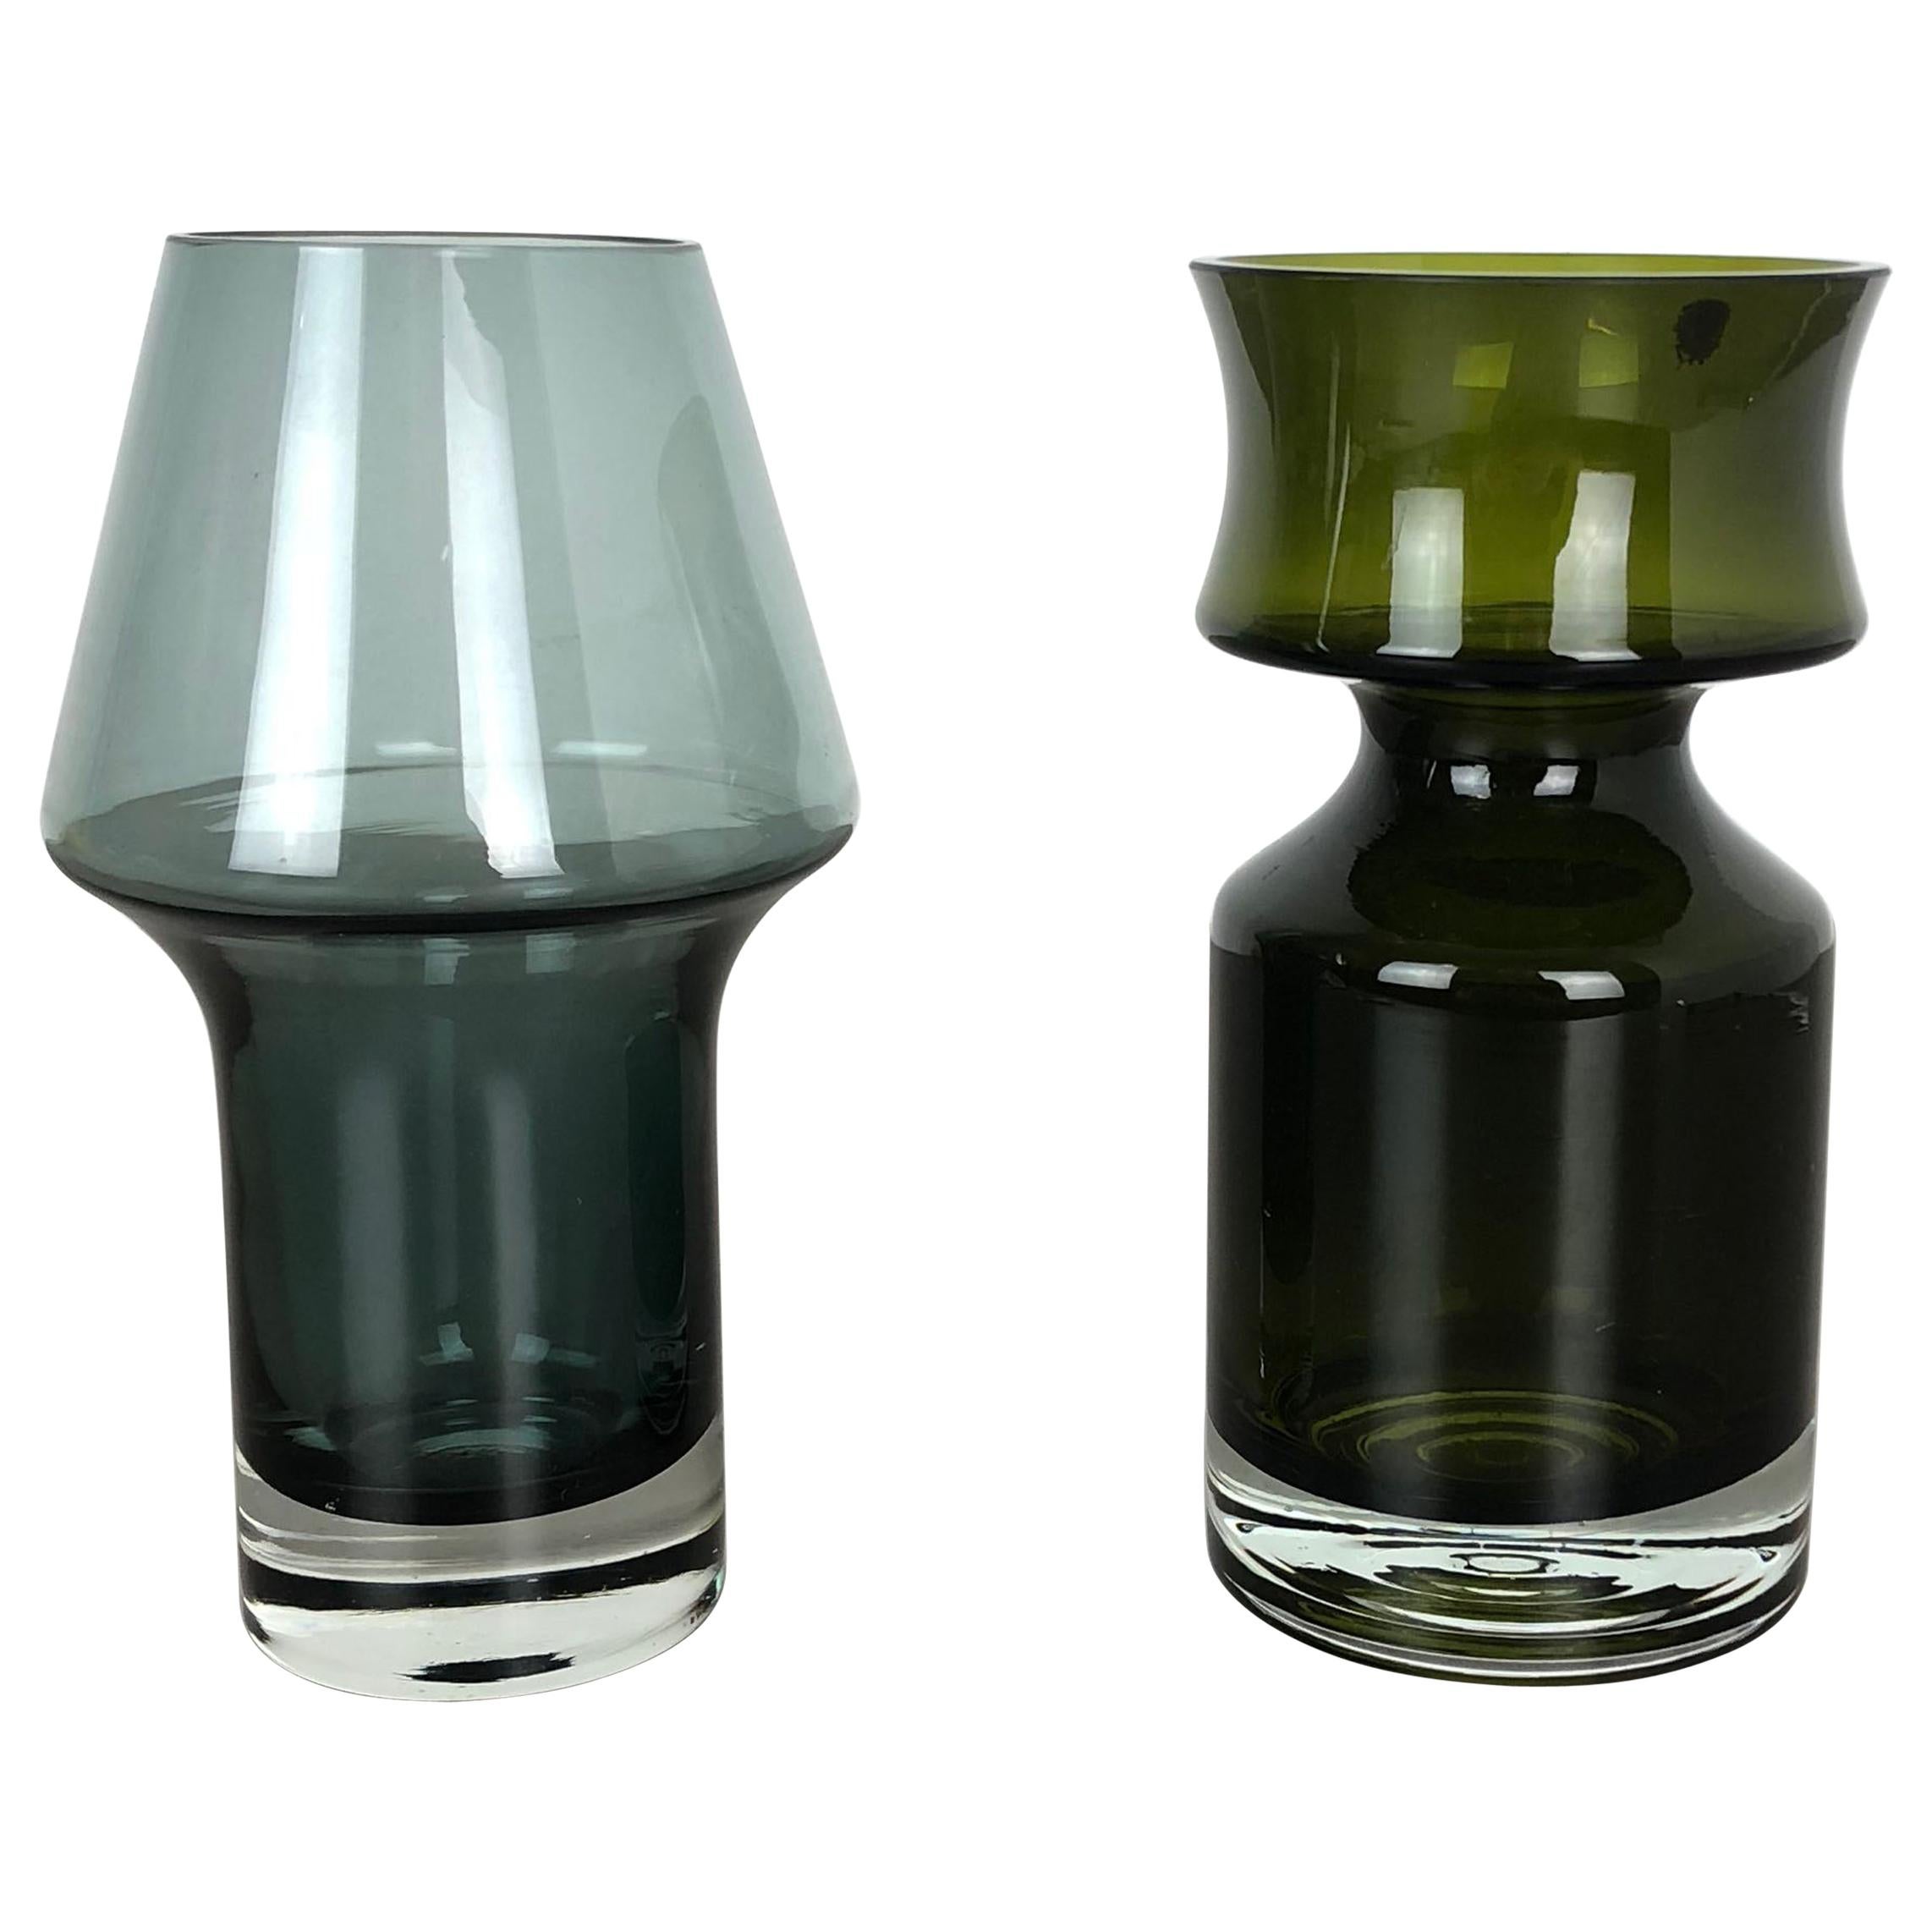 Set of 2 Glass Vases by Tamara Aladin for Riihimaen Lasi Oy, Finland, 1970s